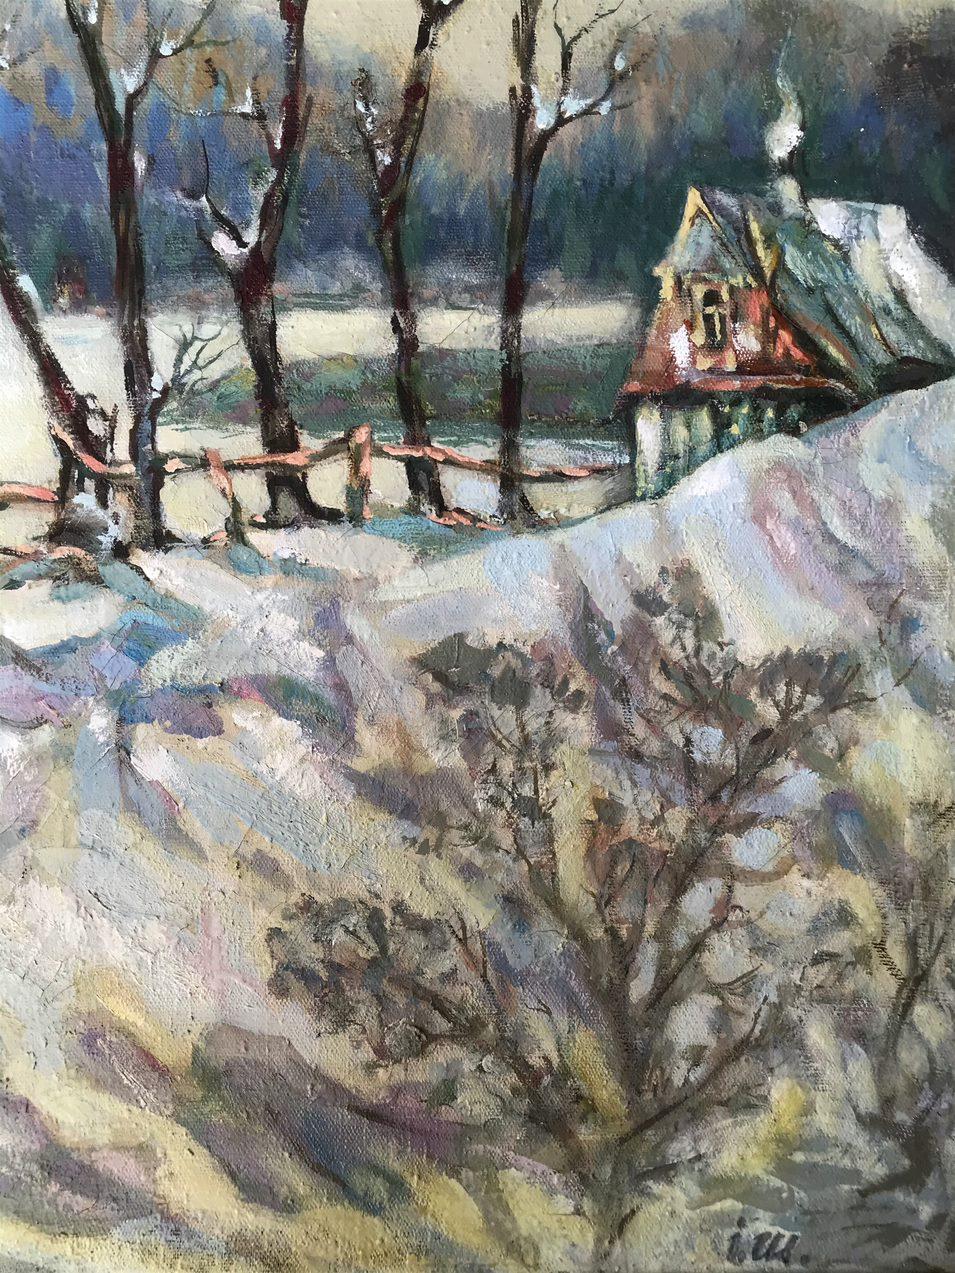 Artist: Shapoval Ivan Leontyevich
Work: Original oil painting, handmade artwork, one of a kind 
Medium: Oil on Canvas
Style: Impressionism
Year: 2000
Title: Winter Day
Size: 41.5